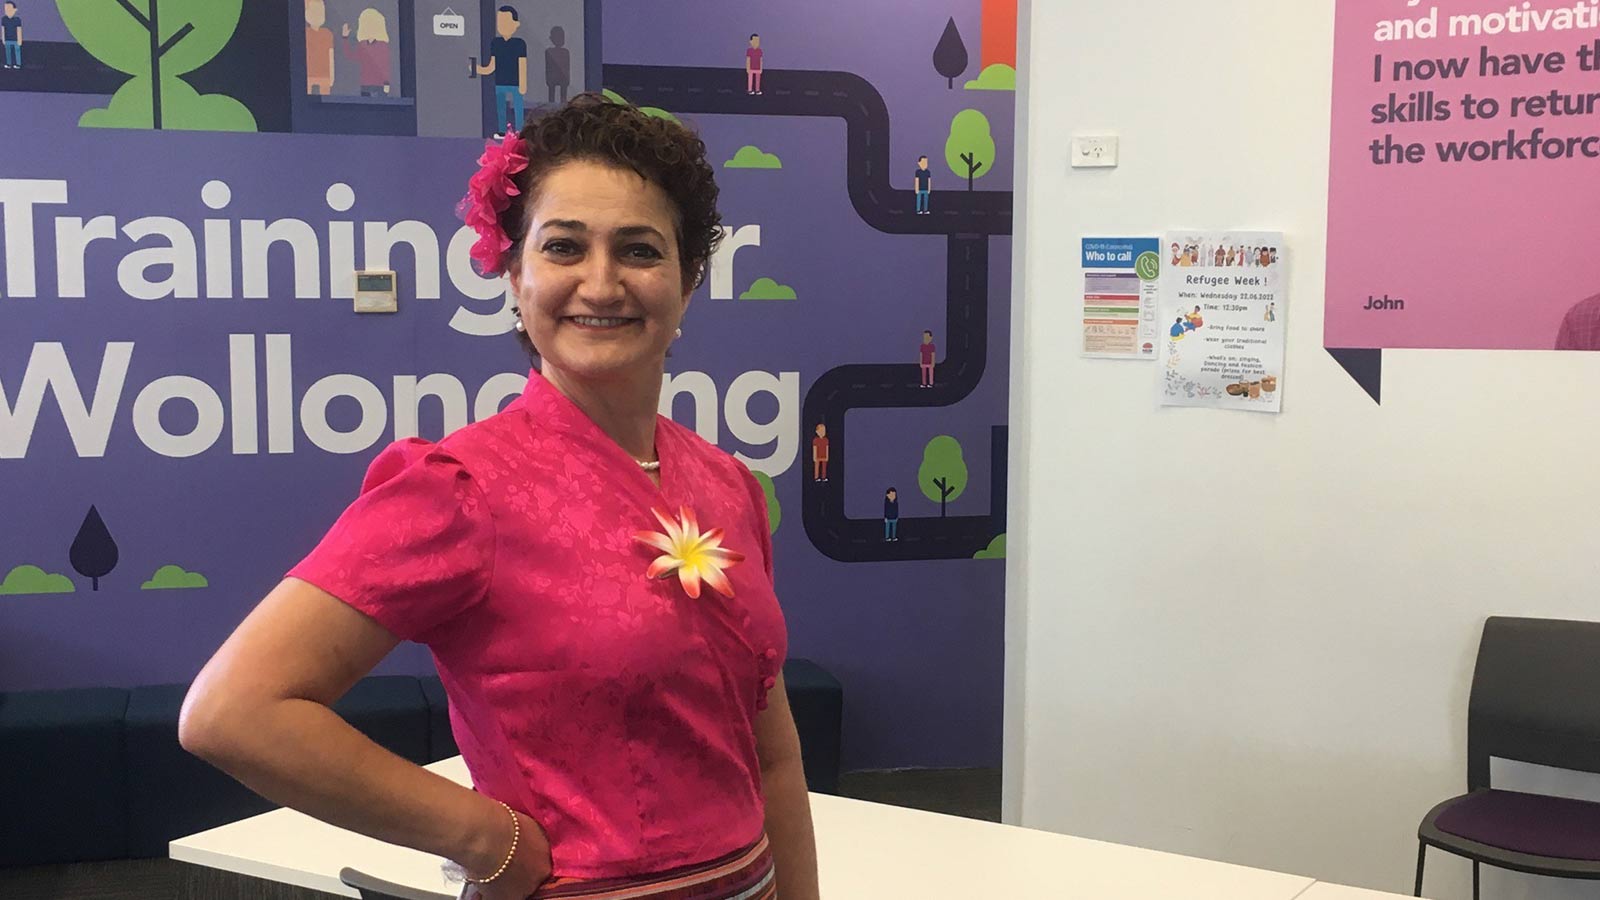 Didi Kello has tan skin and short dark hair. She is wearing a pink shirt and a pink flower in her hair, standing in a adult education classroom